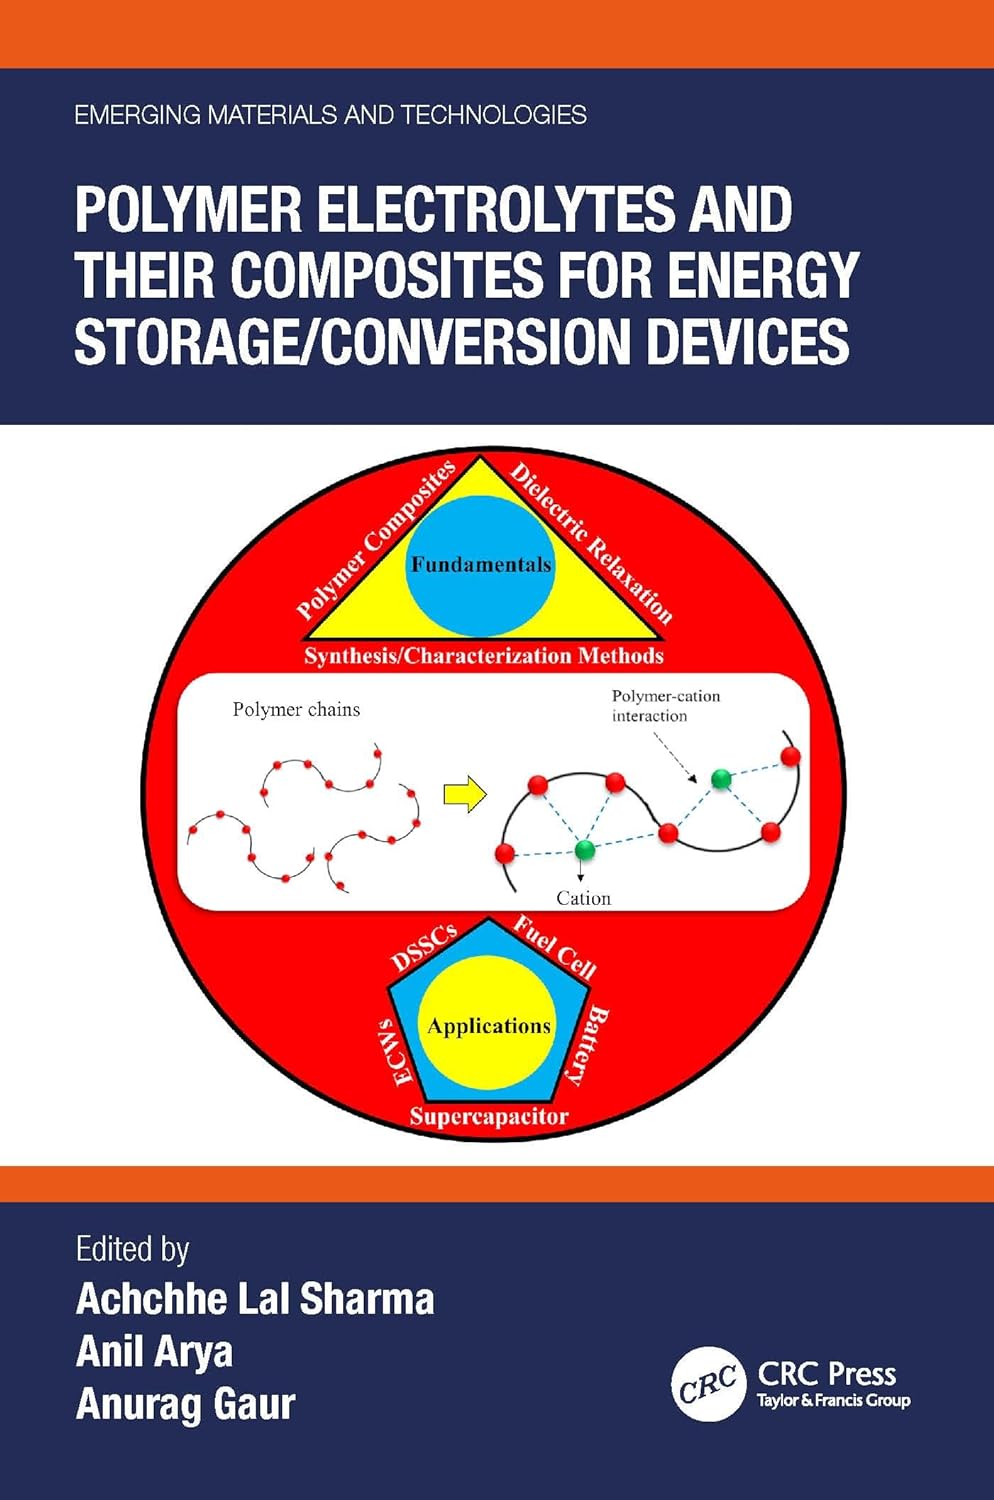 Image Polymers electrolytes and their composites for energy storage